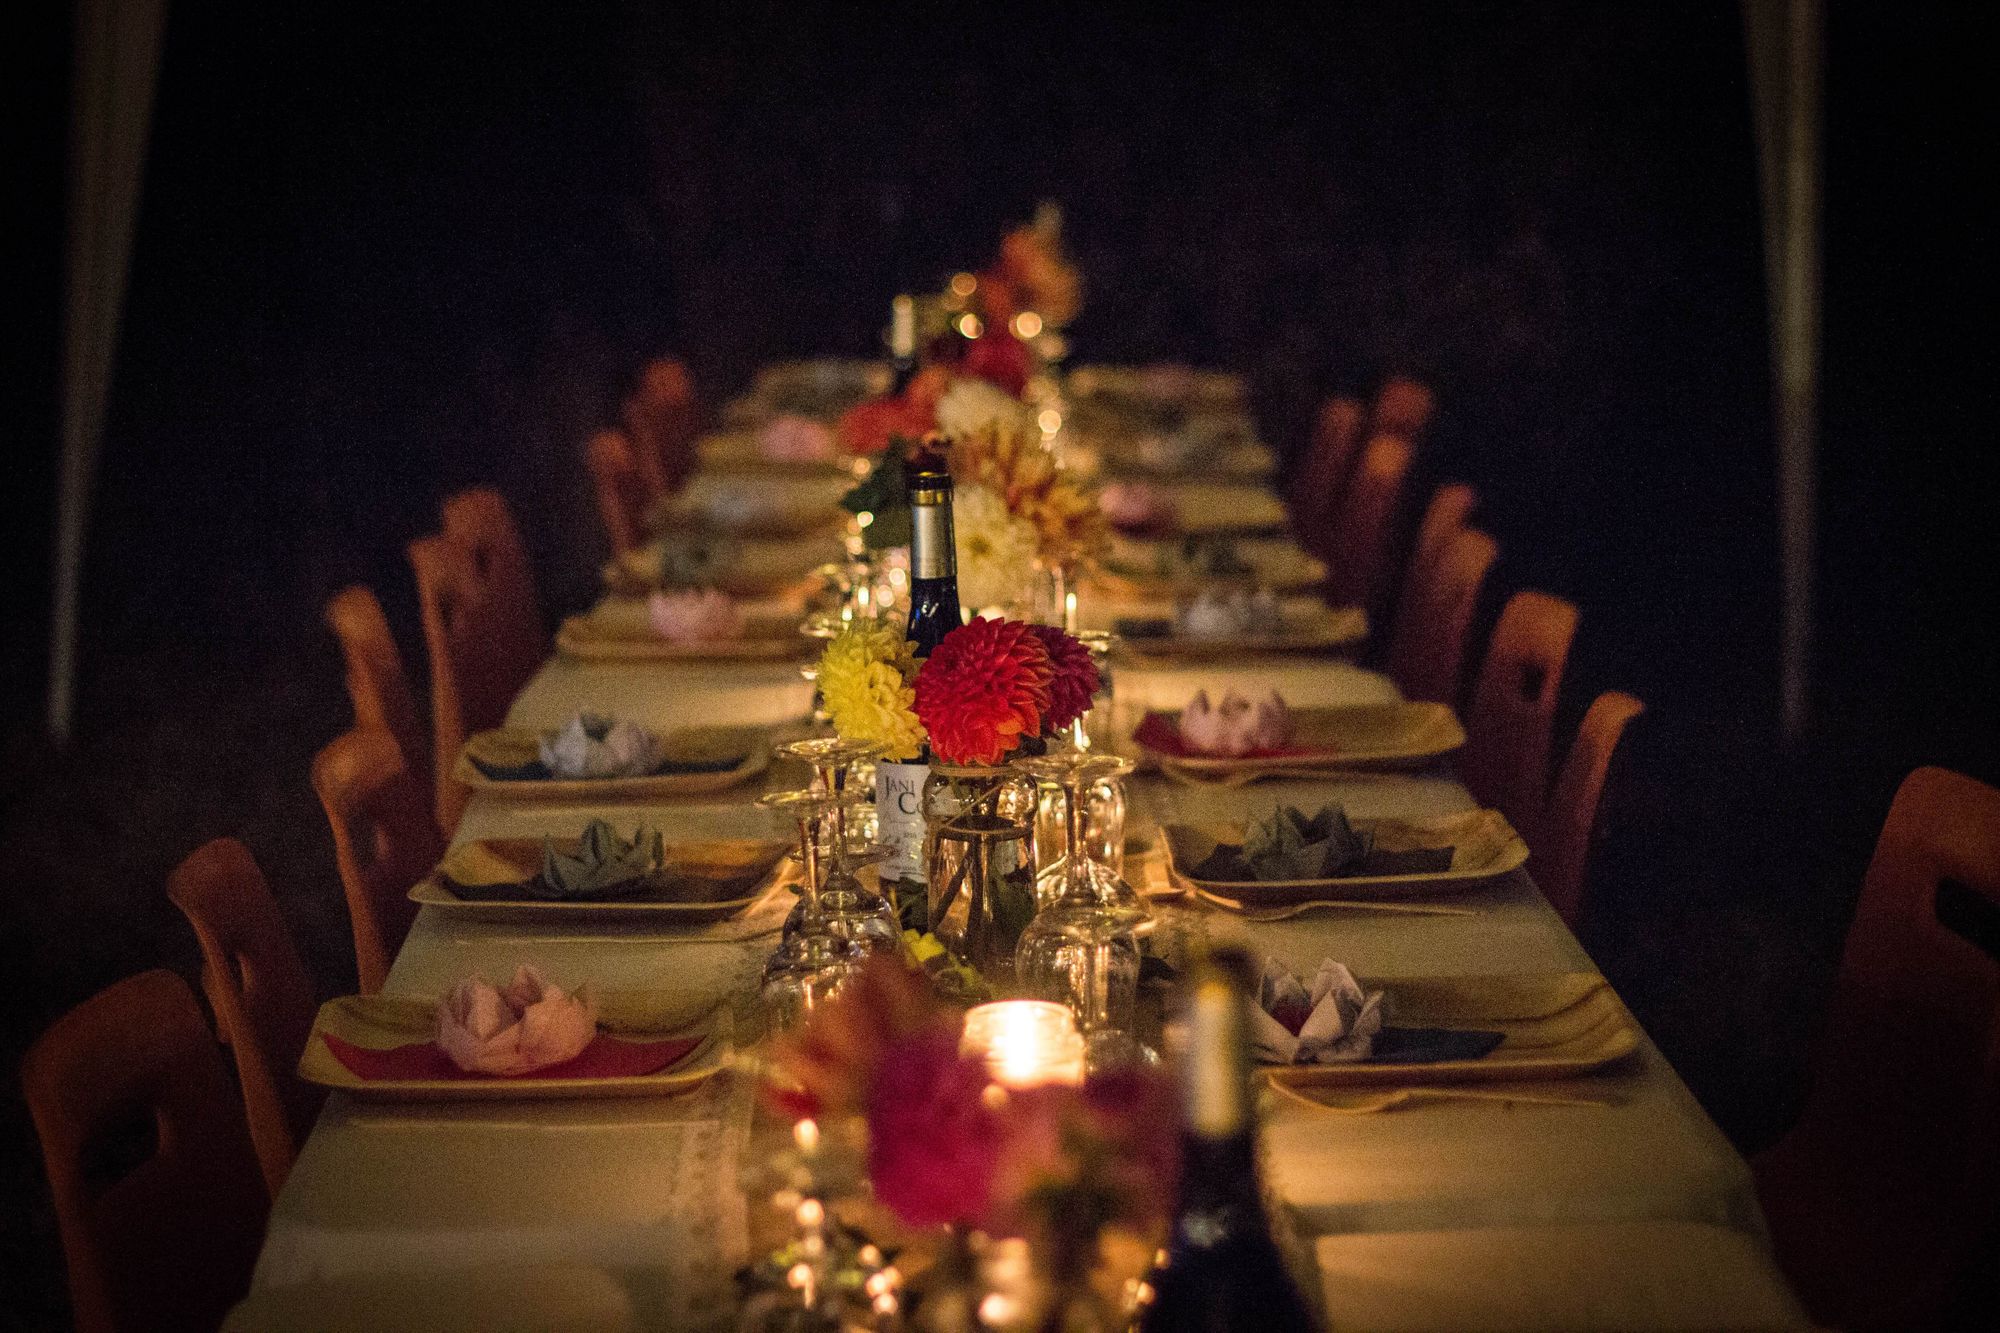 Long table set for a candlelit supper with wine, plates, glasses and flowers